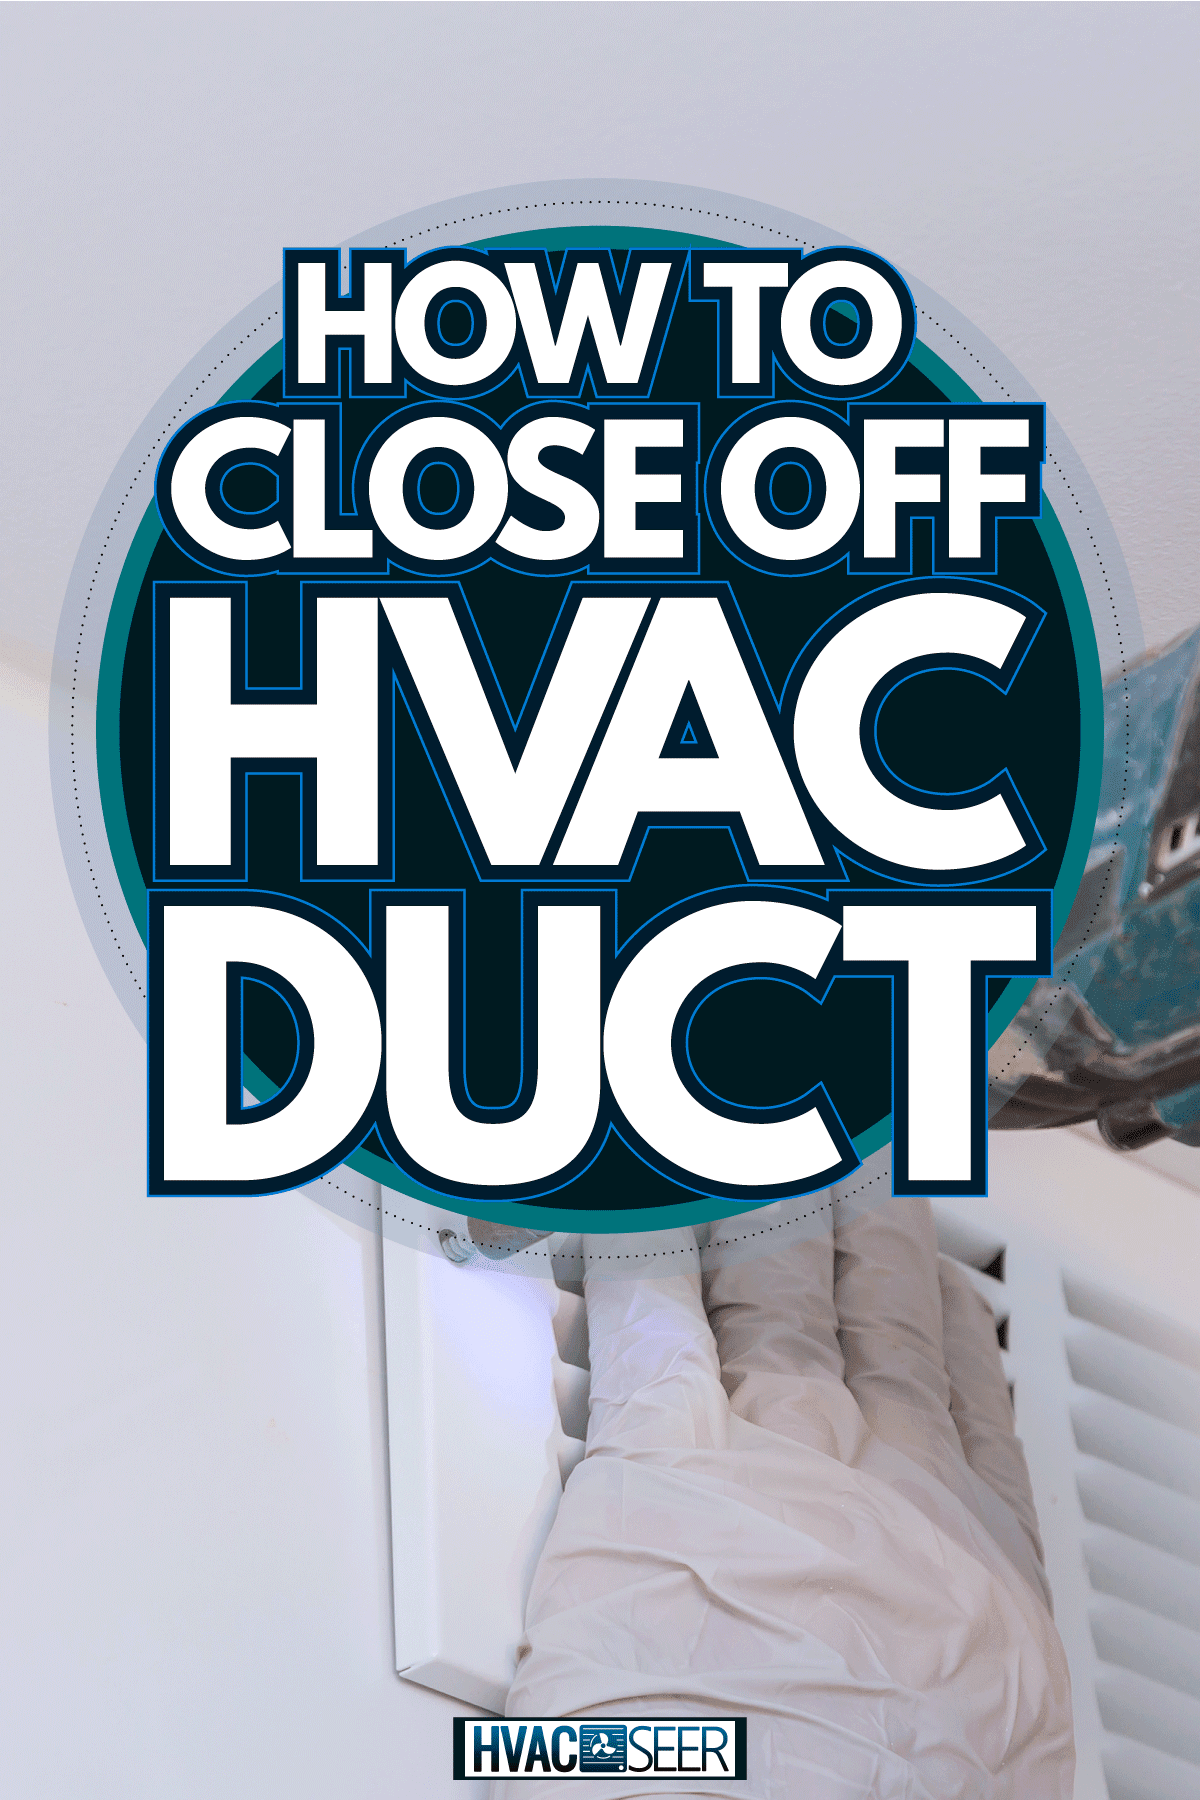 DIY solutions for vent openings